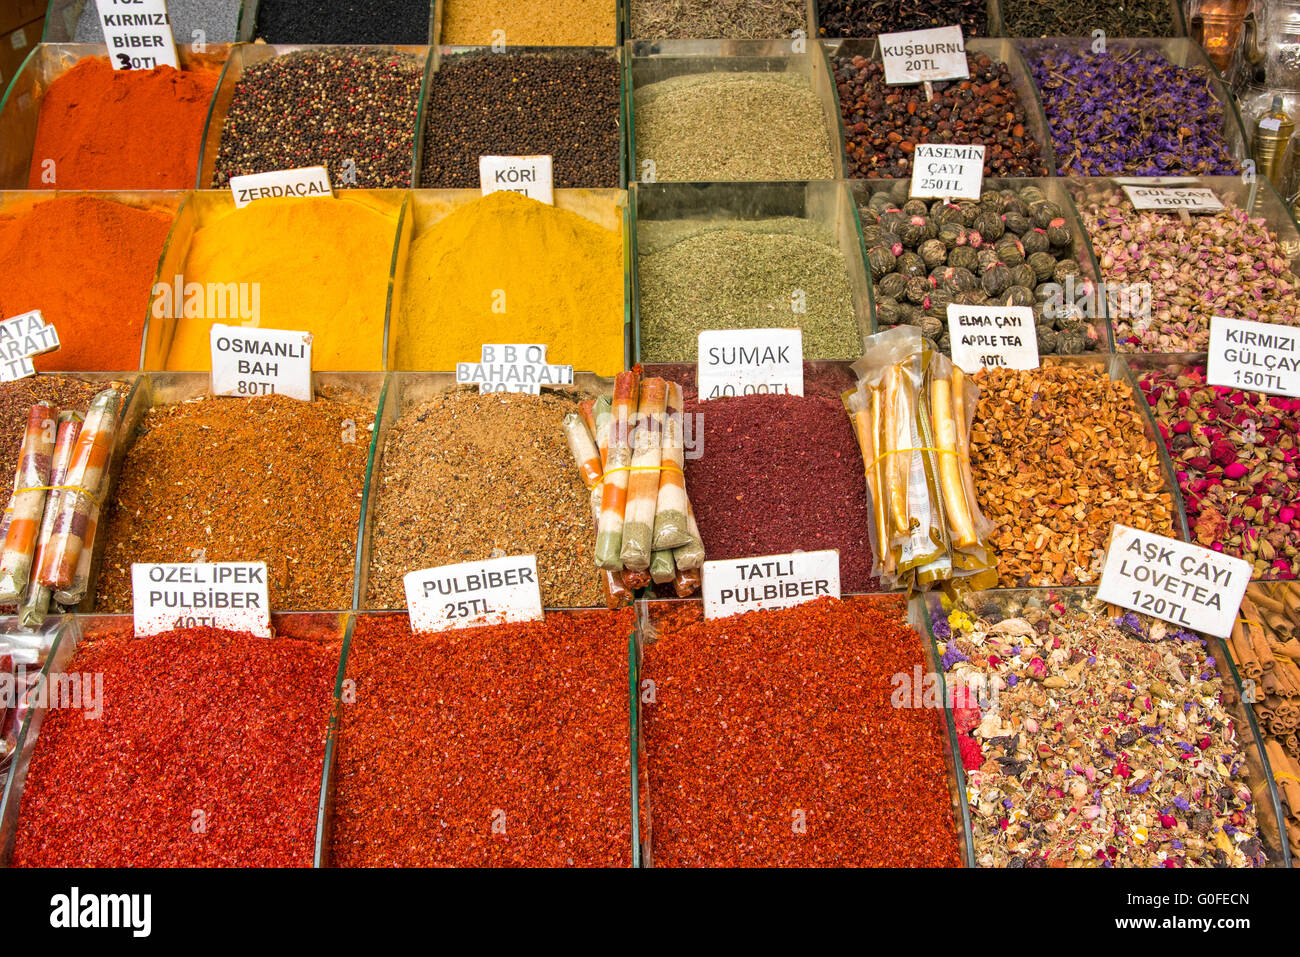 Spices and teas at the Spice market in Istanbul, Turkey Stock Photo